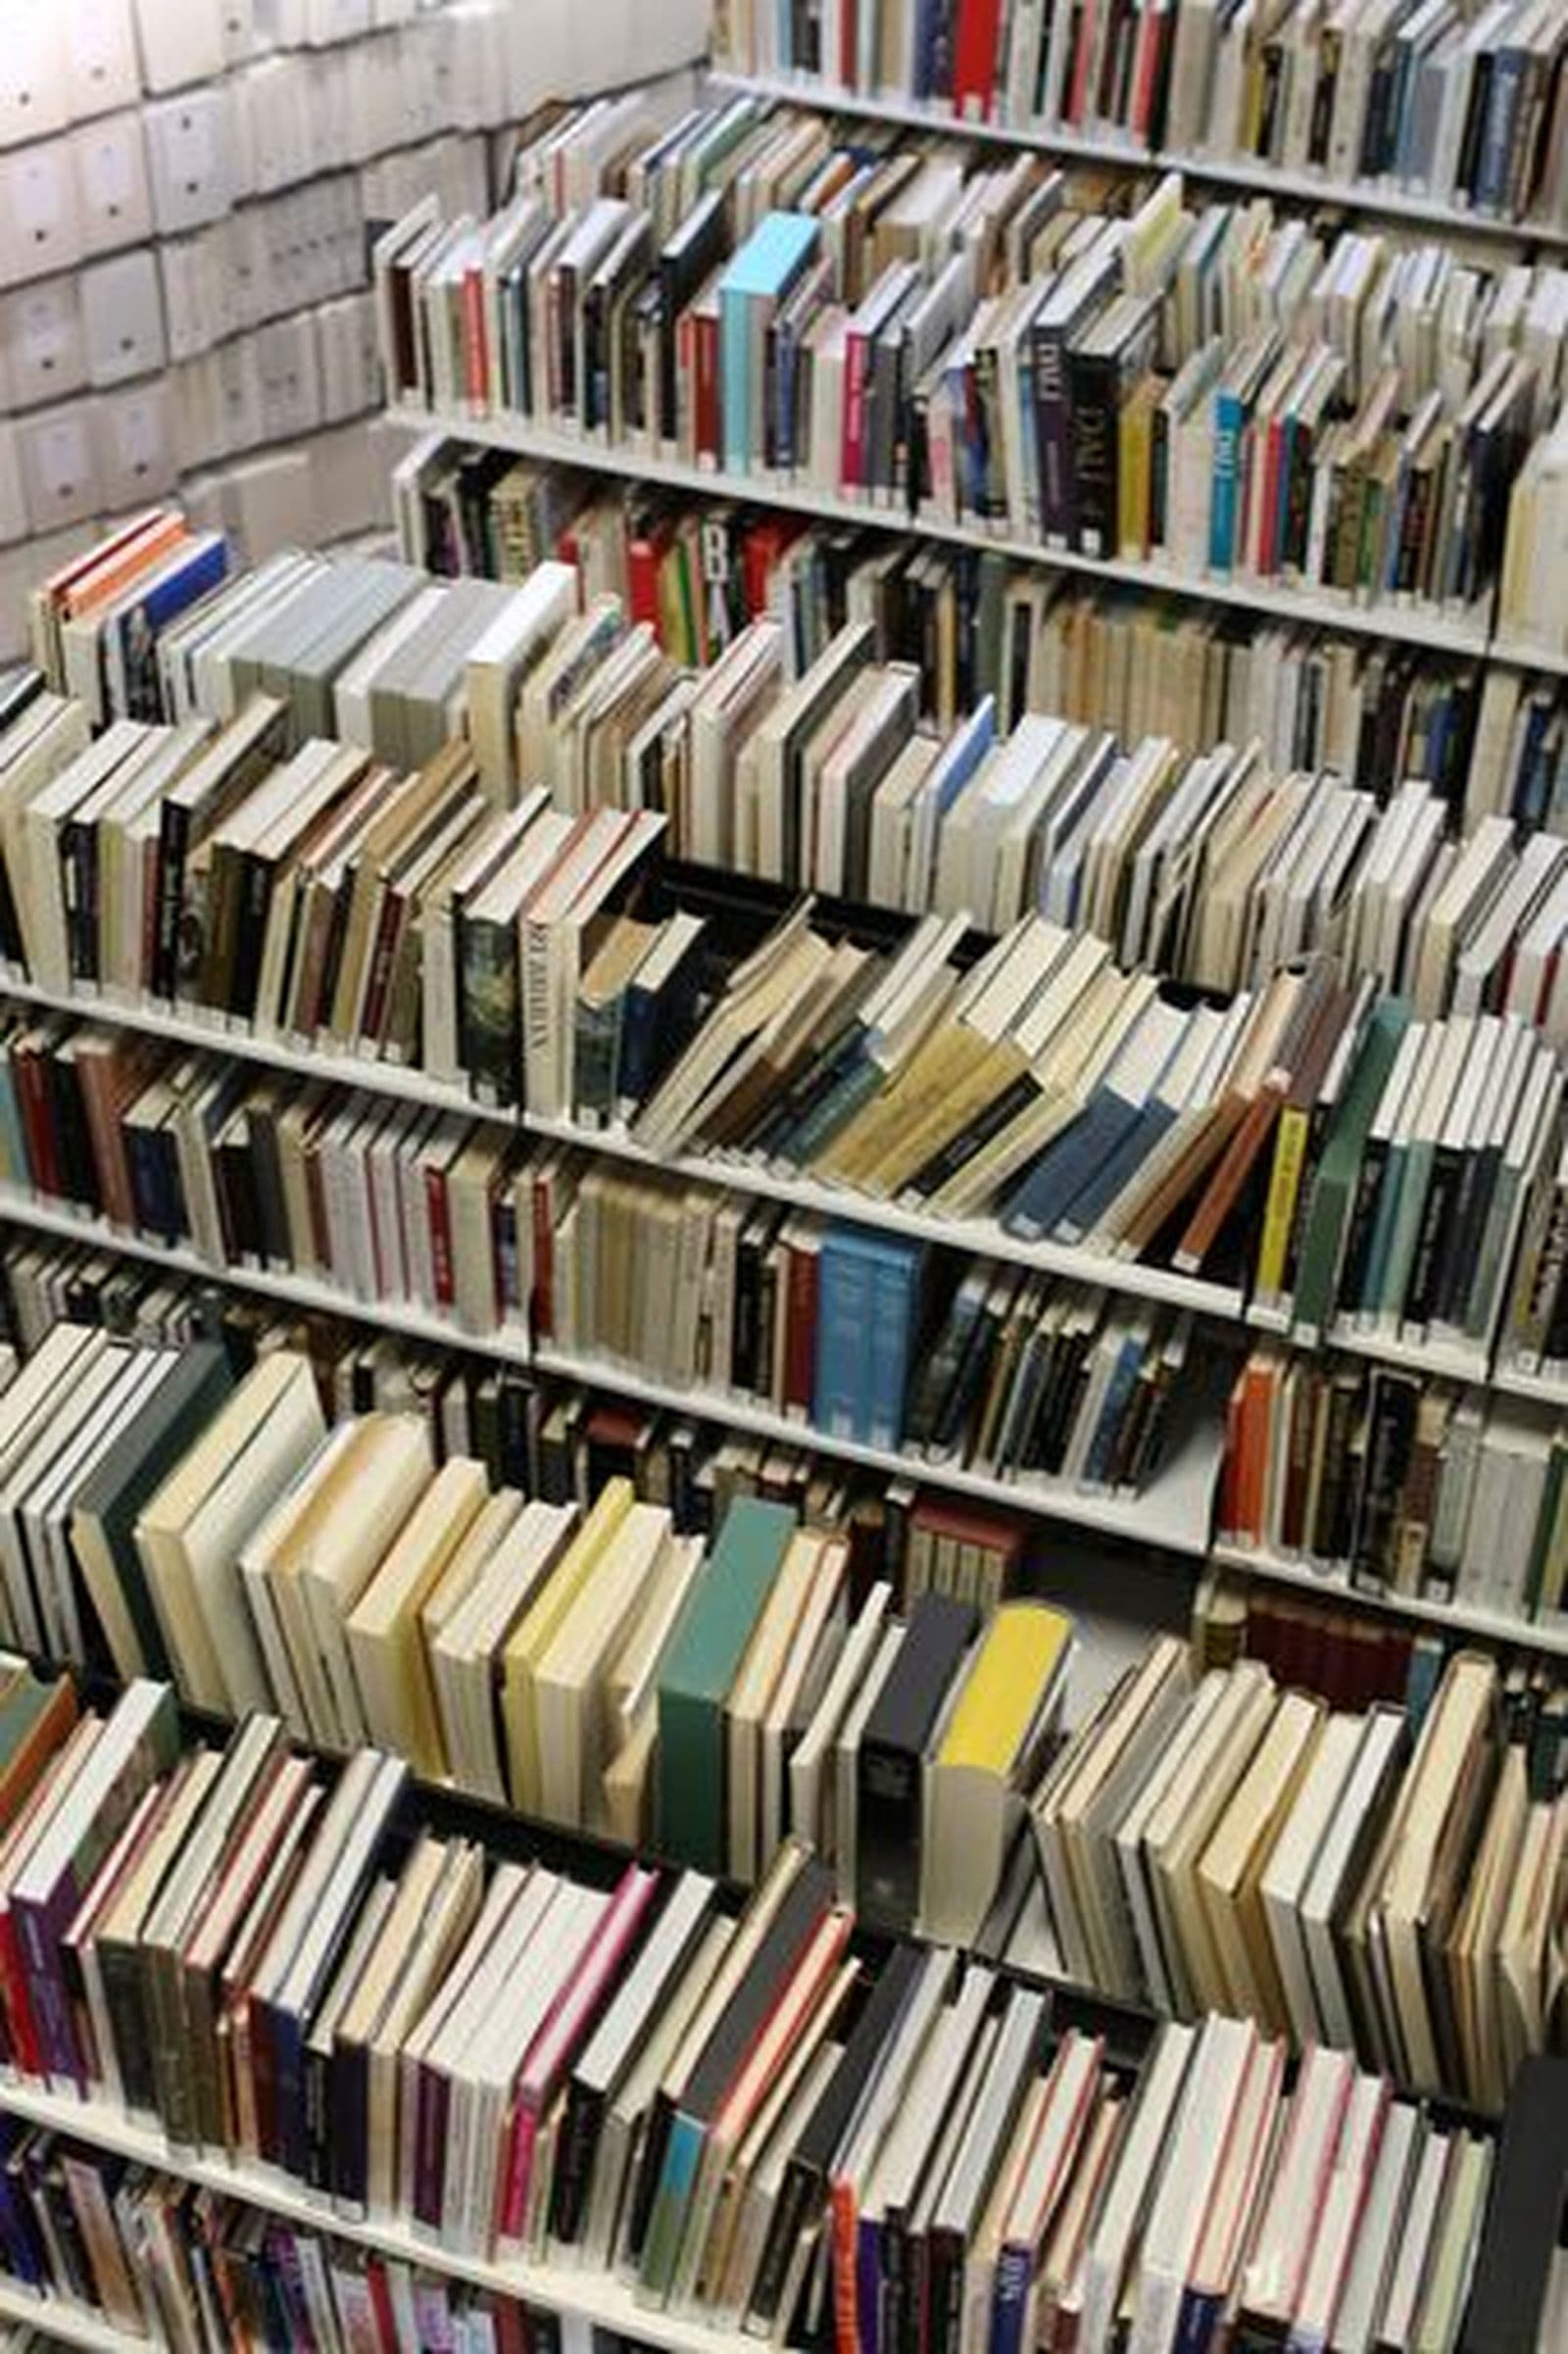 Photograph of library books on stacks overhead